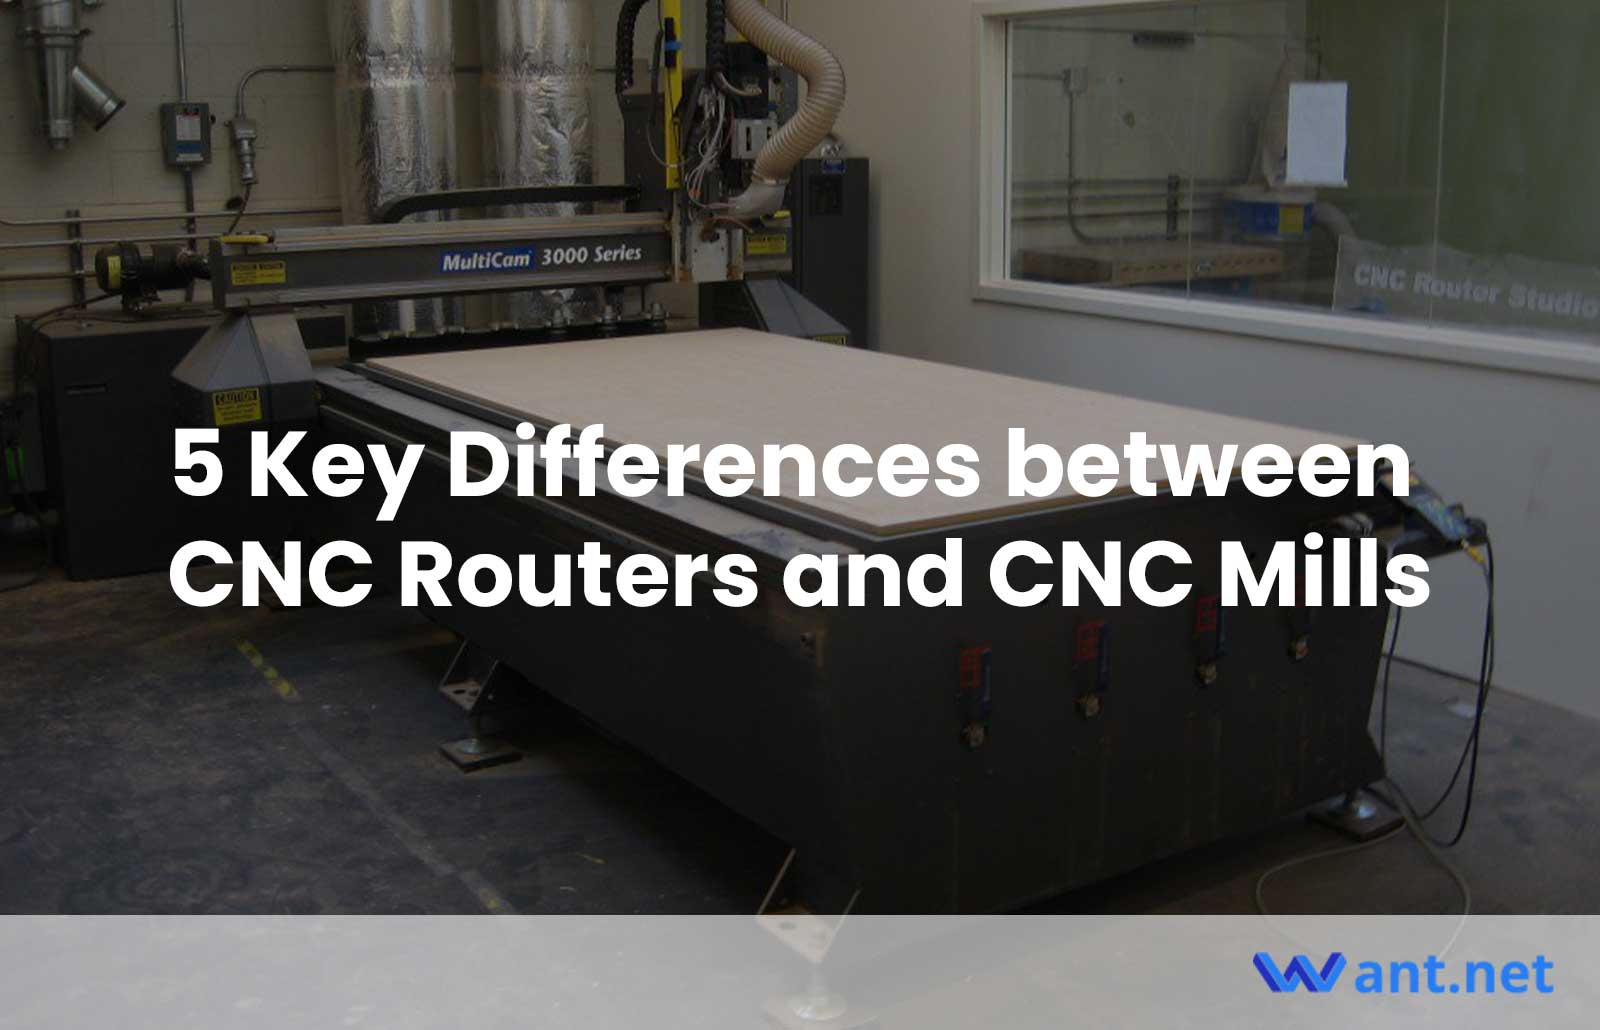 Differences between CNC Routers and CNC Mills